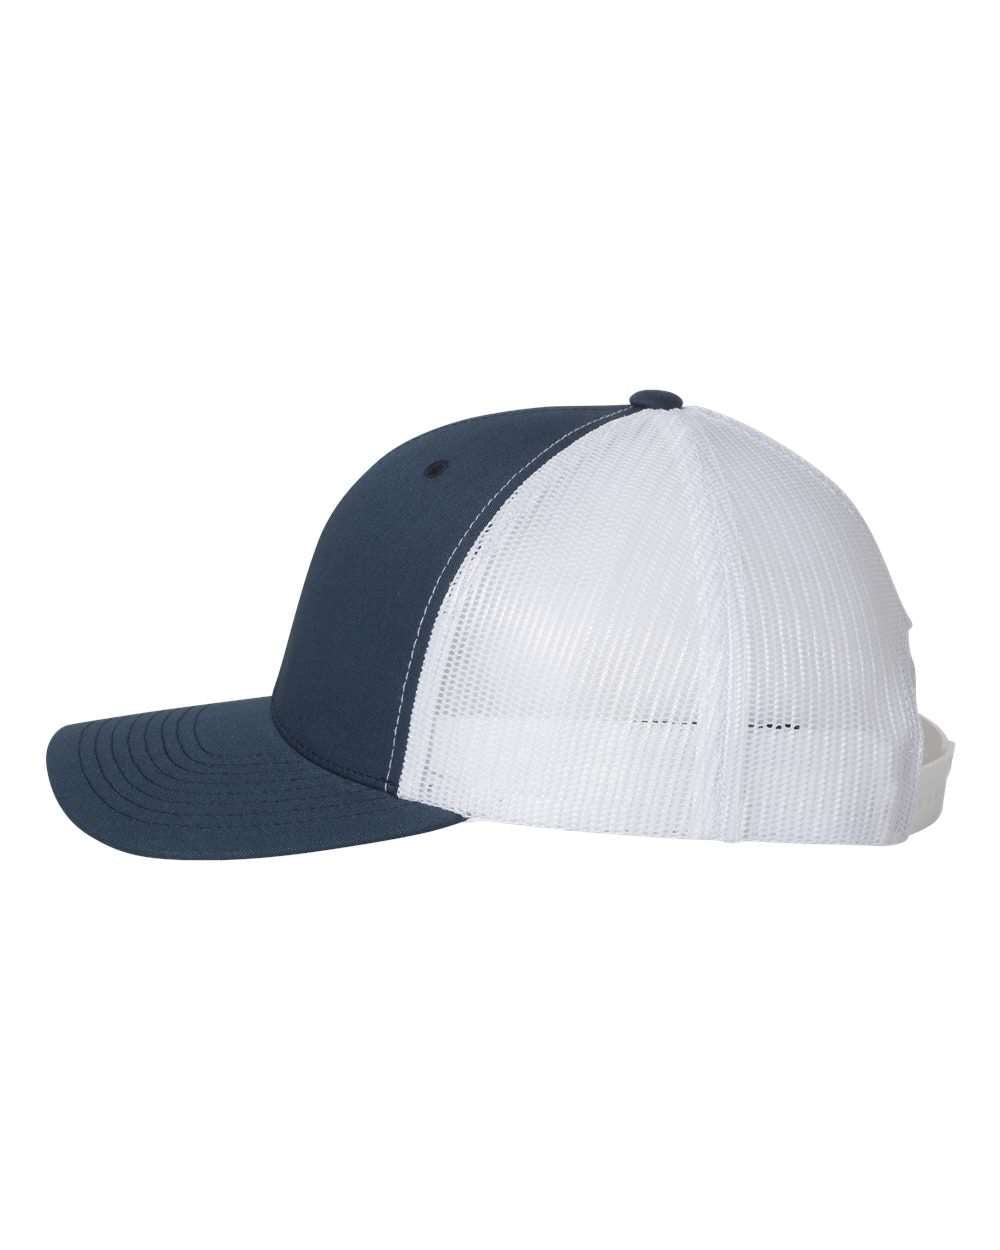 Swag Trucker Hat - Navy with White Mesh